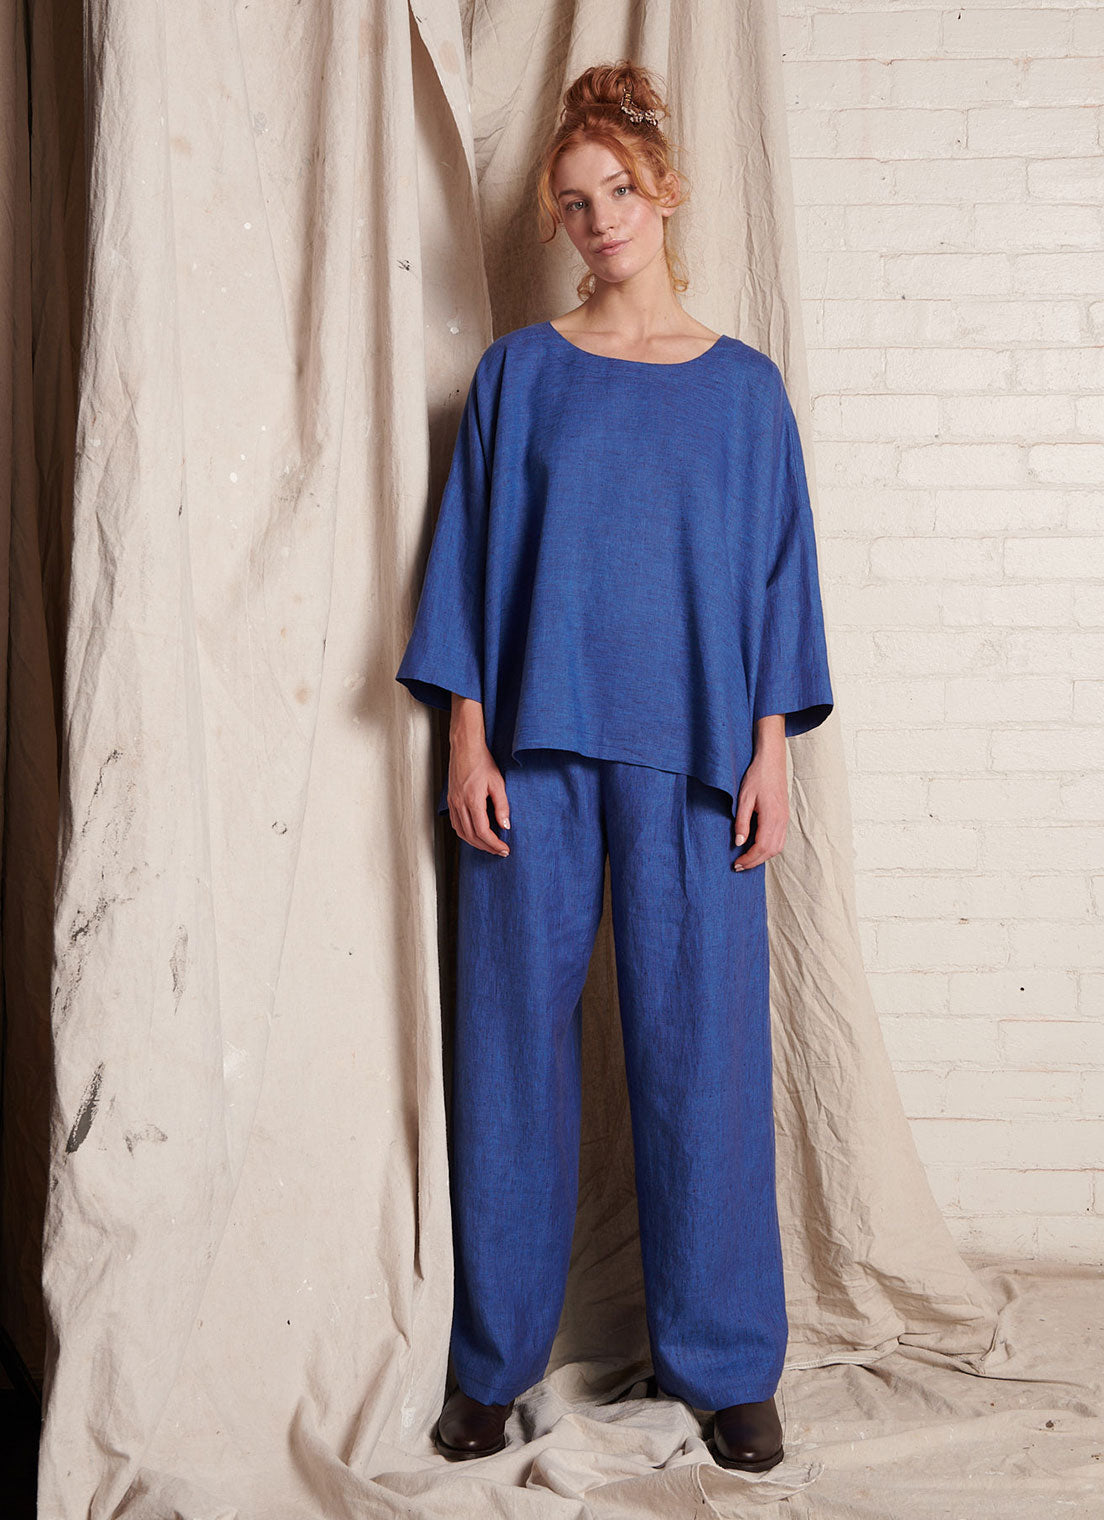 A blue, easy fit top with round neckline, long sleeves and embroidered detail at the back made from European pure linen